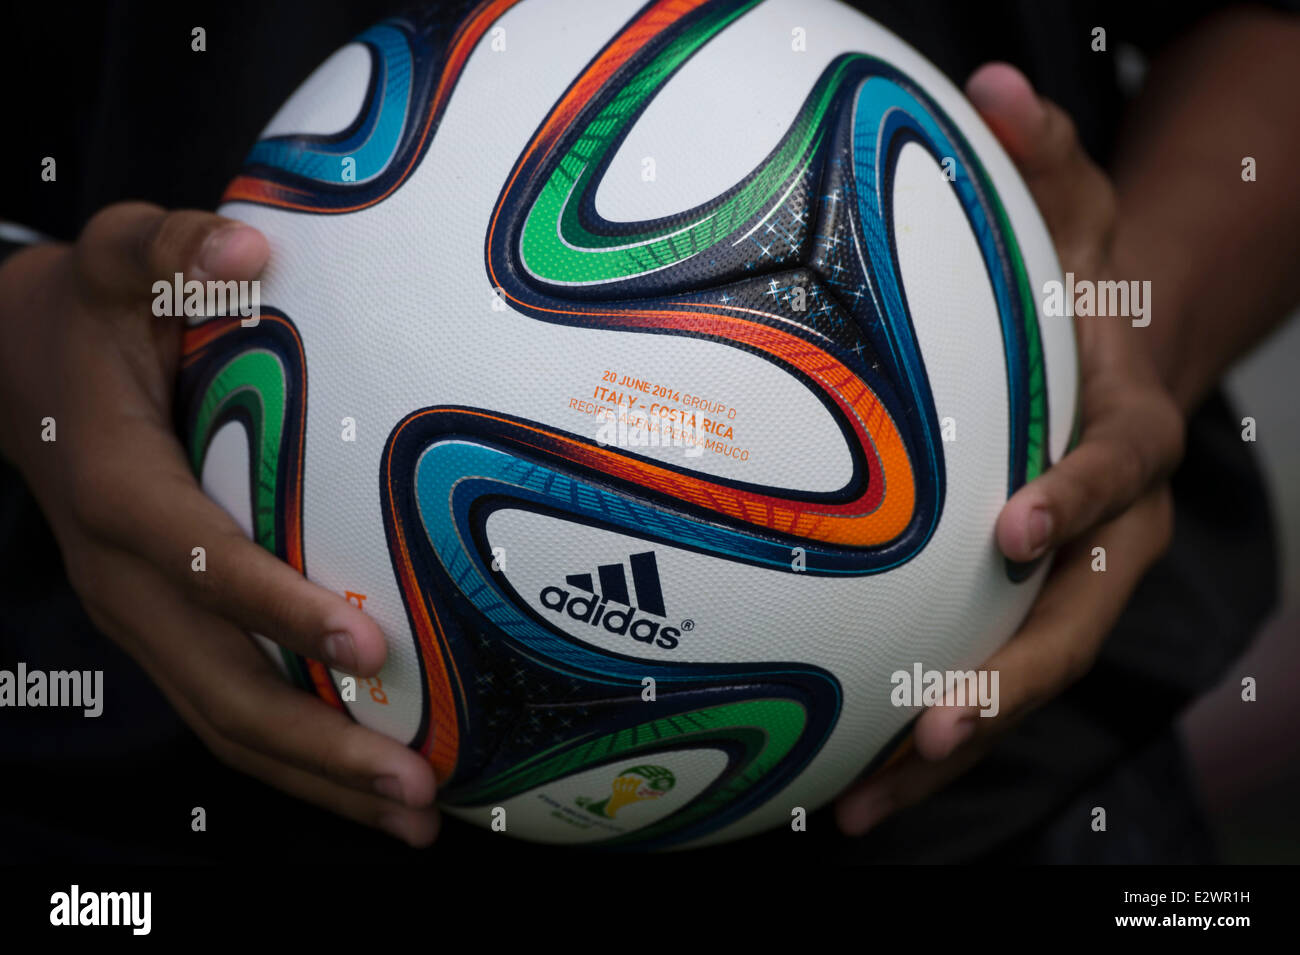 Adidas Brazuca is official match ball of J League 2014